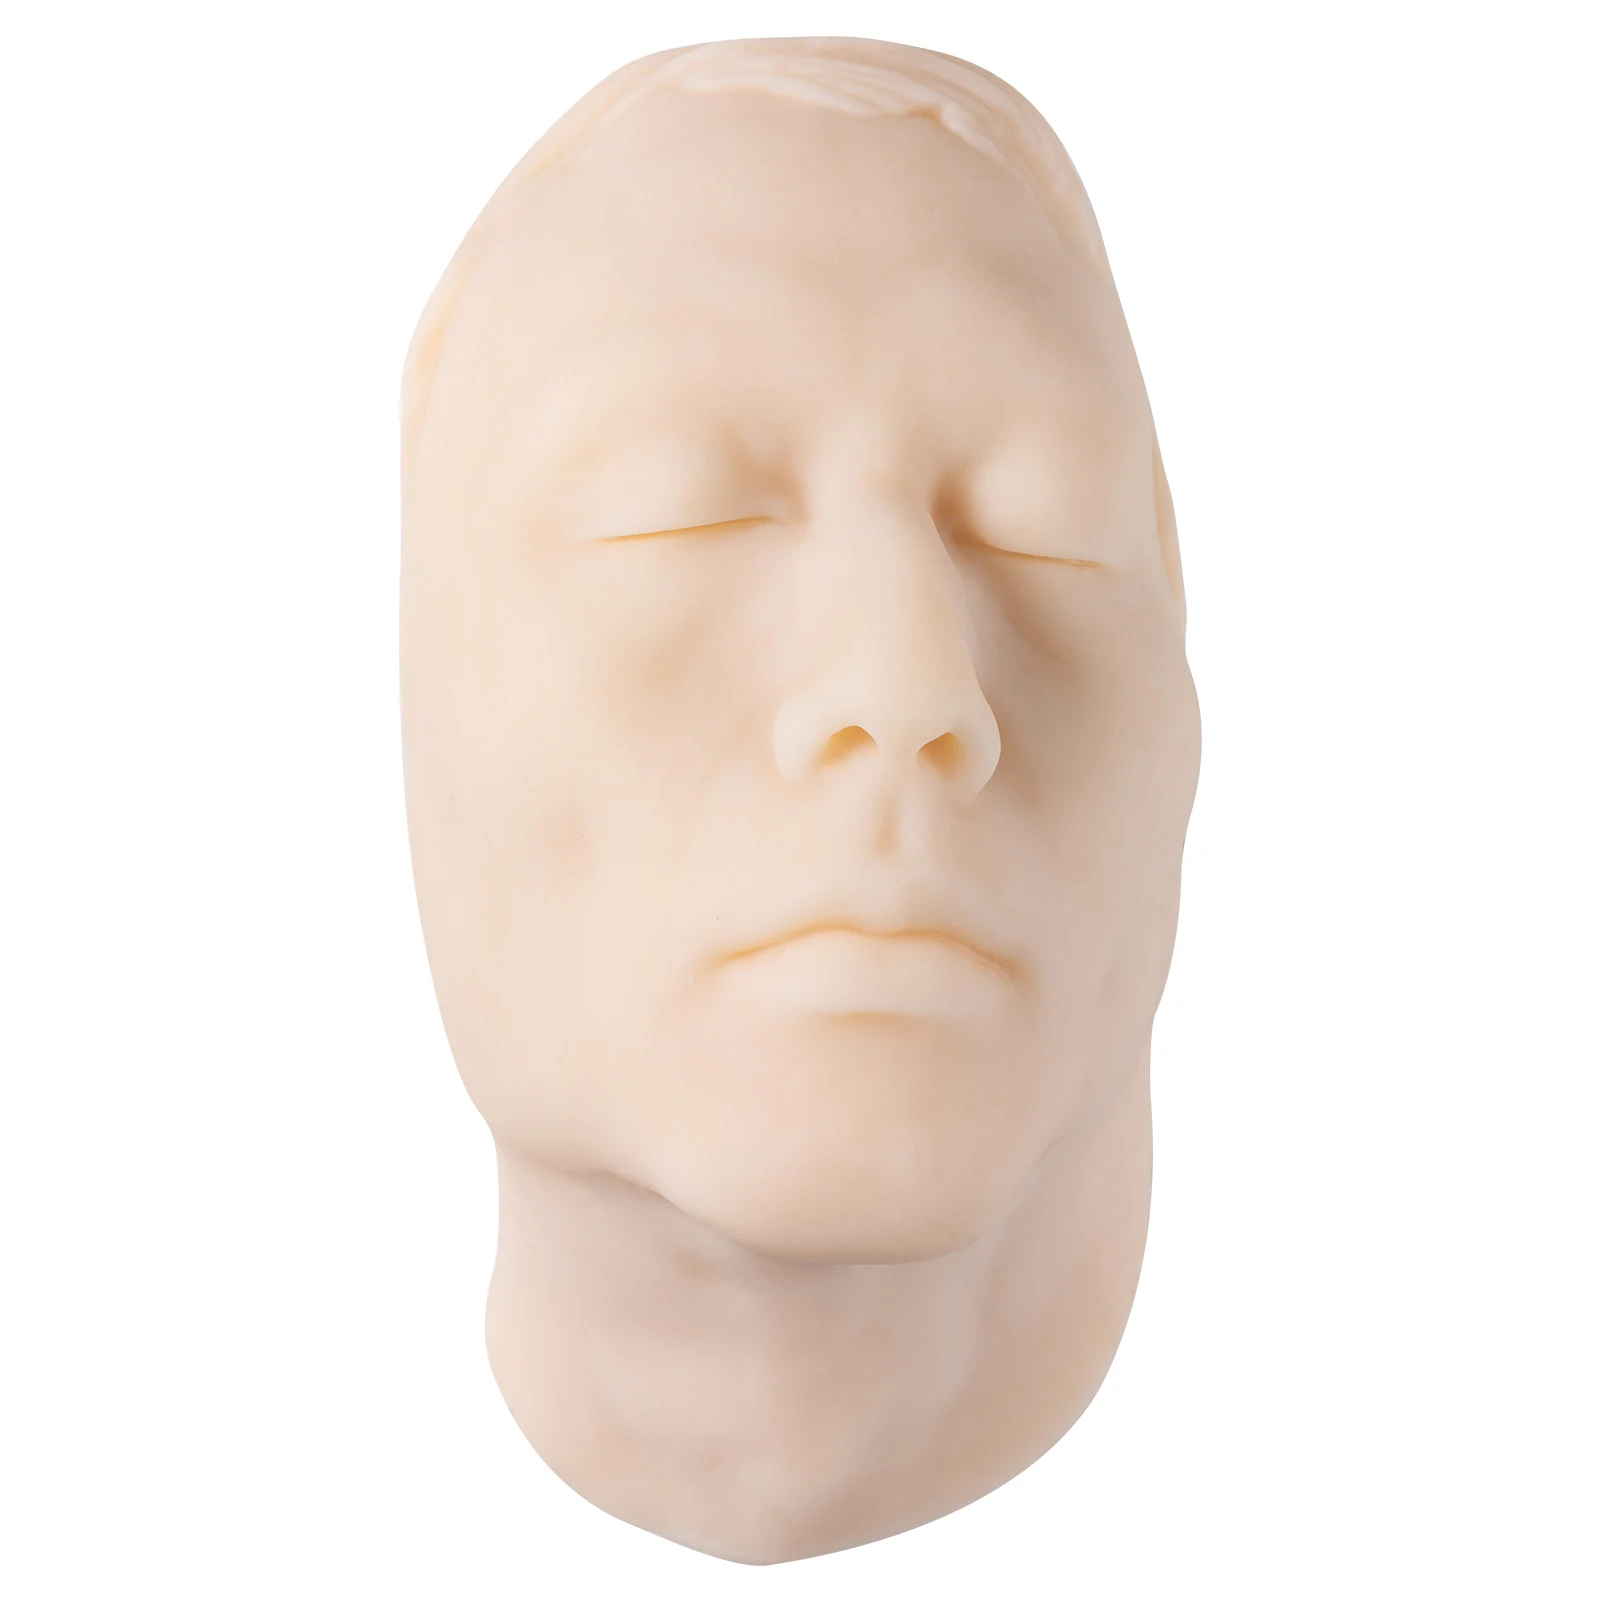 Medarchitect Injection Training Soft Mannequin Male Face Model Head Model for Micro-Plastic Teaching, Practice